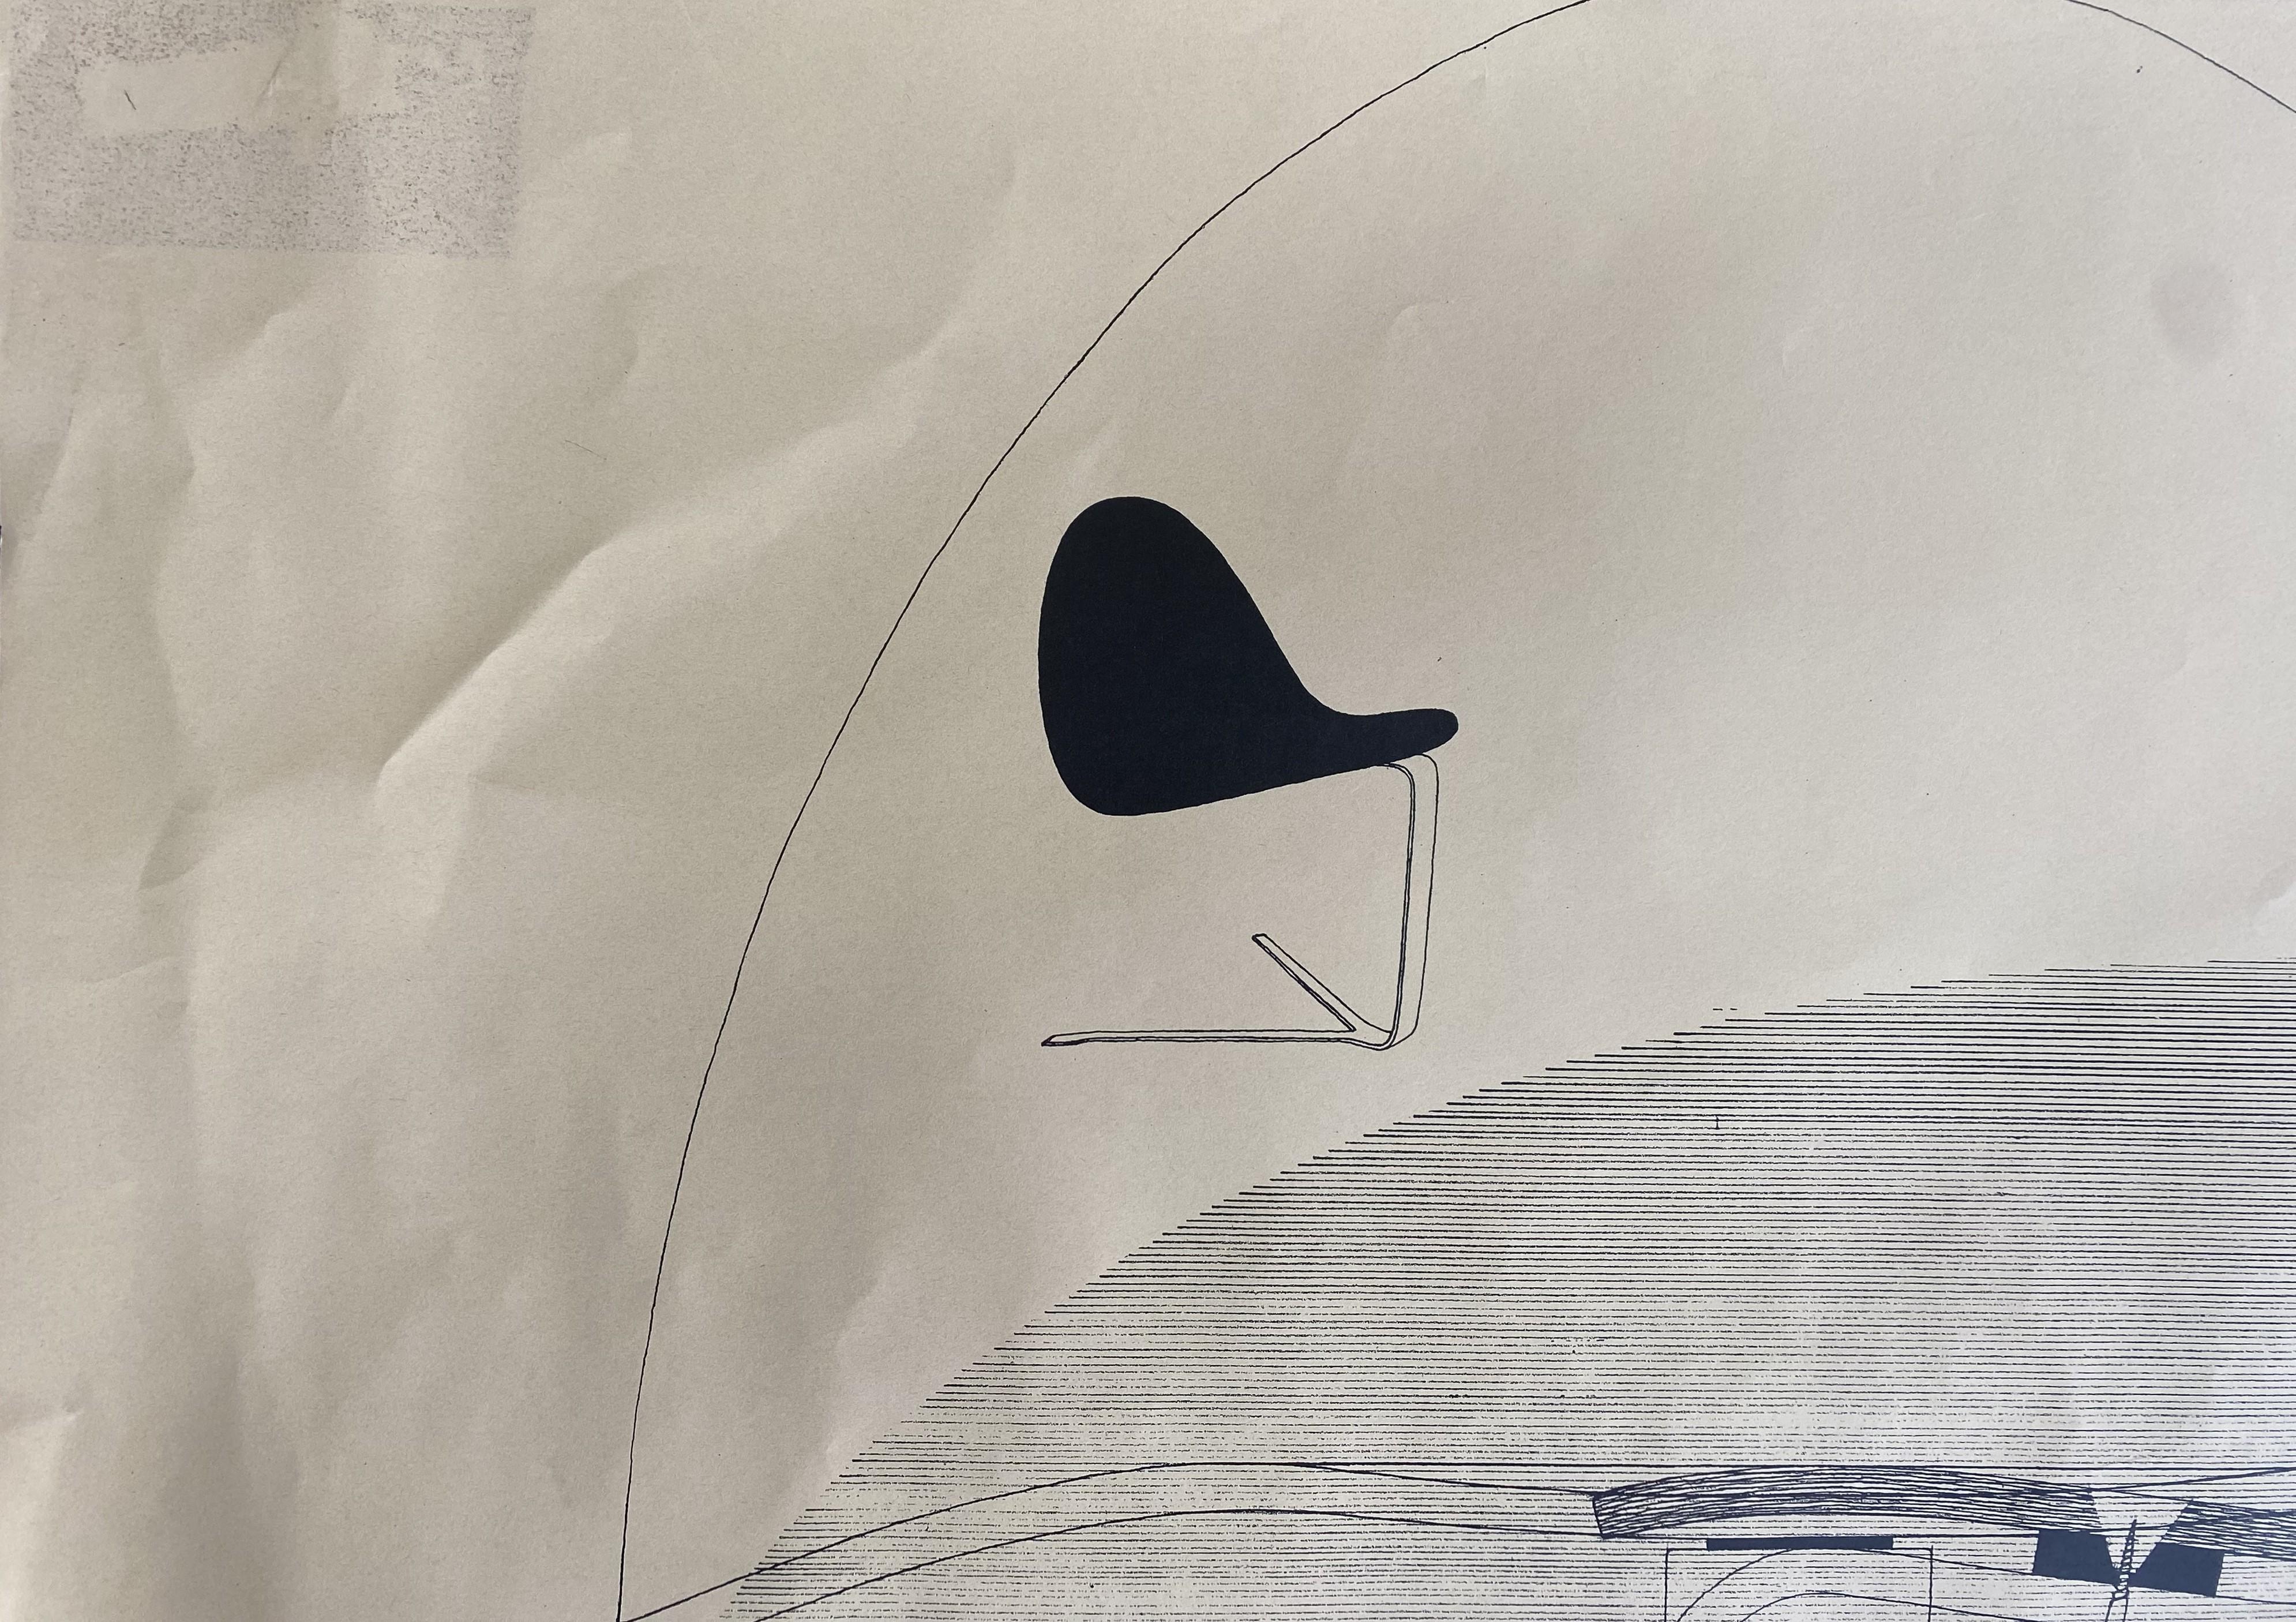 Here is a very rare and desirable vintage Working drawing poster displaying a 1953 prototype representation of the One-Legged or stacking chair by the Danish designer Poul Kjærholm. 
An image of the poster is printed in the catalogue 'Poul Kjaerholm